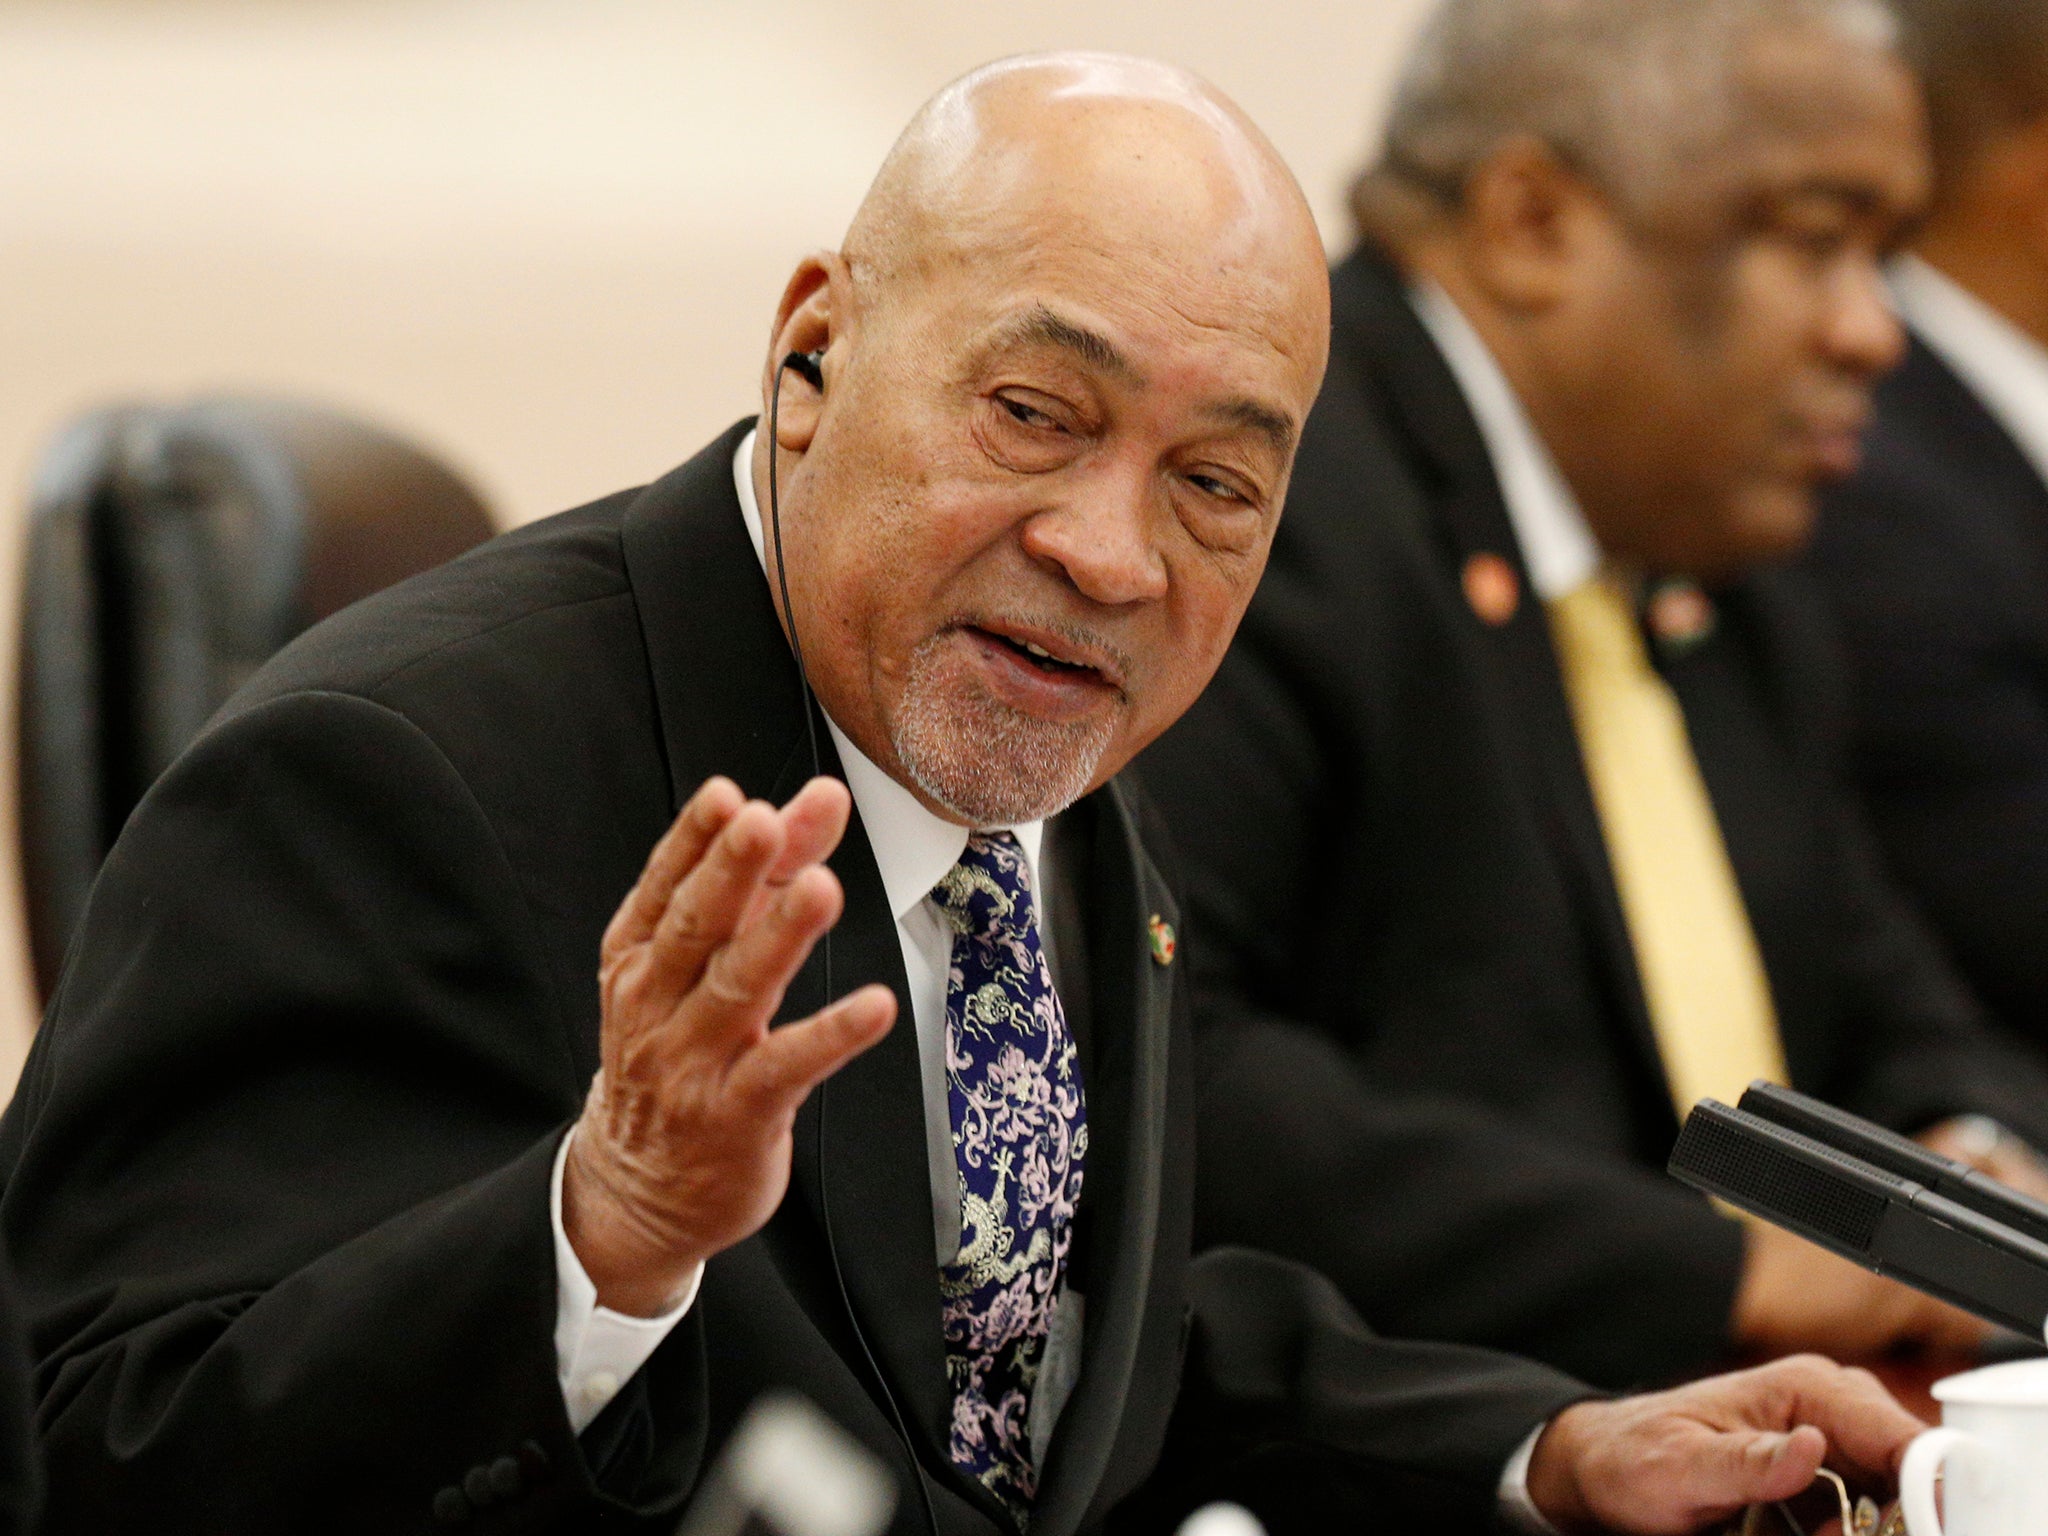 Bouterse led Suriname through the 1980s as head of a military government, then assumed office again in 2010 and secured re-election five years later